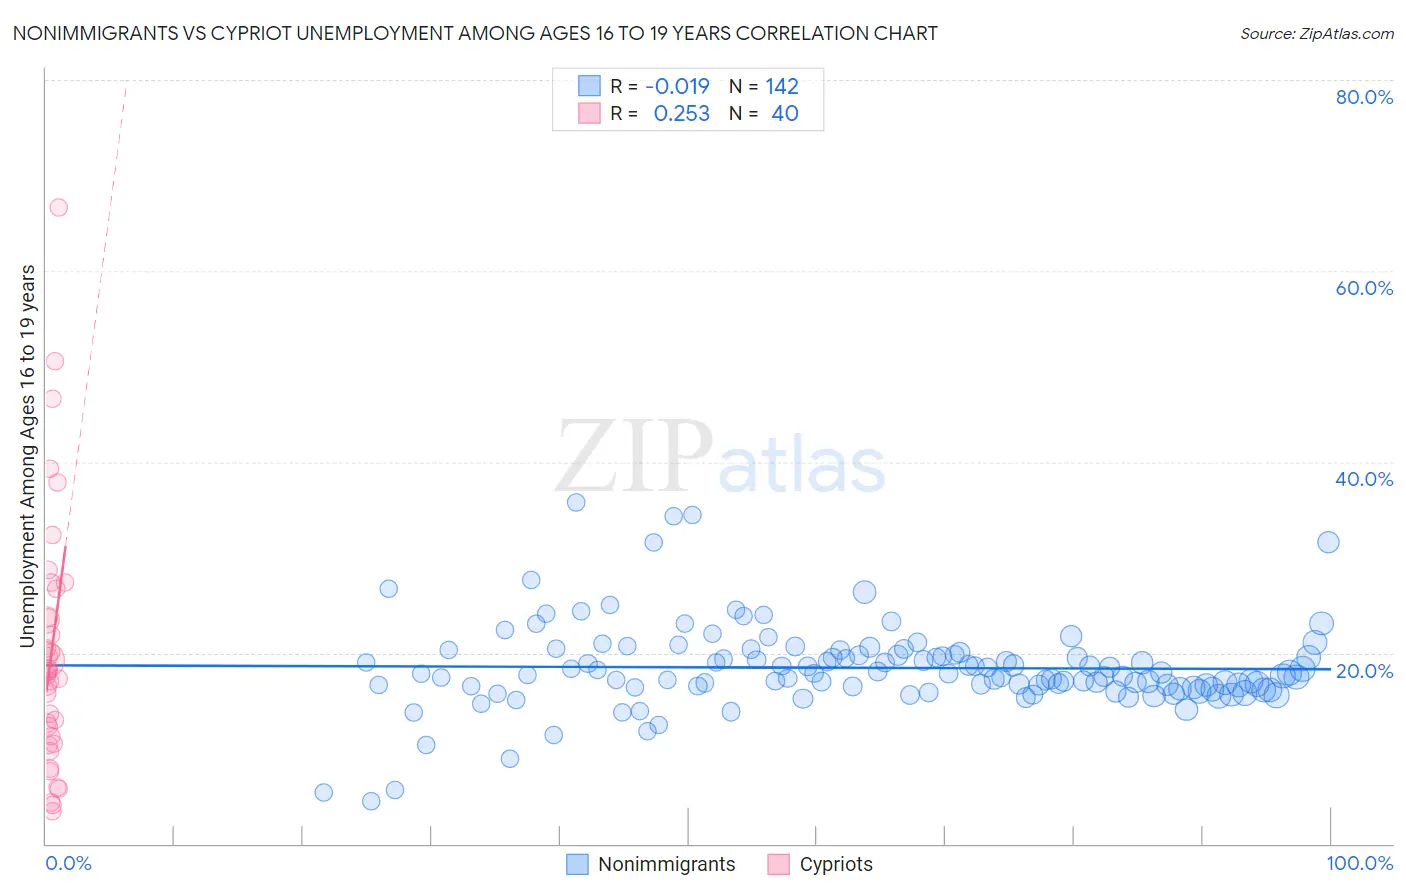 Nonimmigrants vs Cypriot Unemployment Among Ages 16 to 19 years